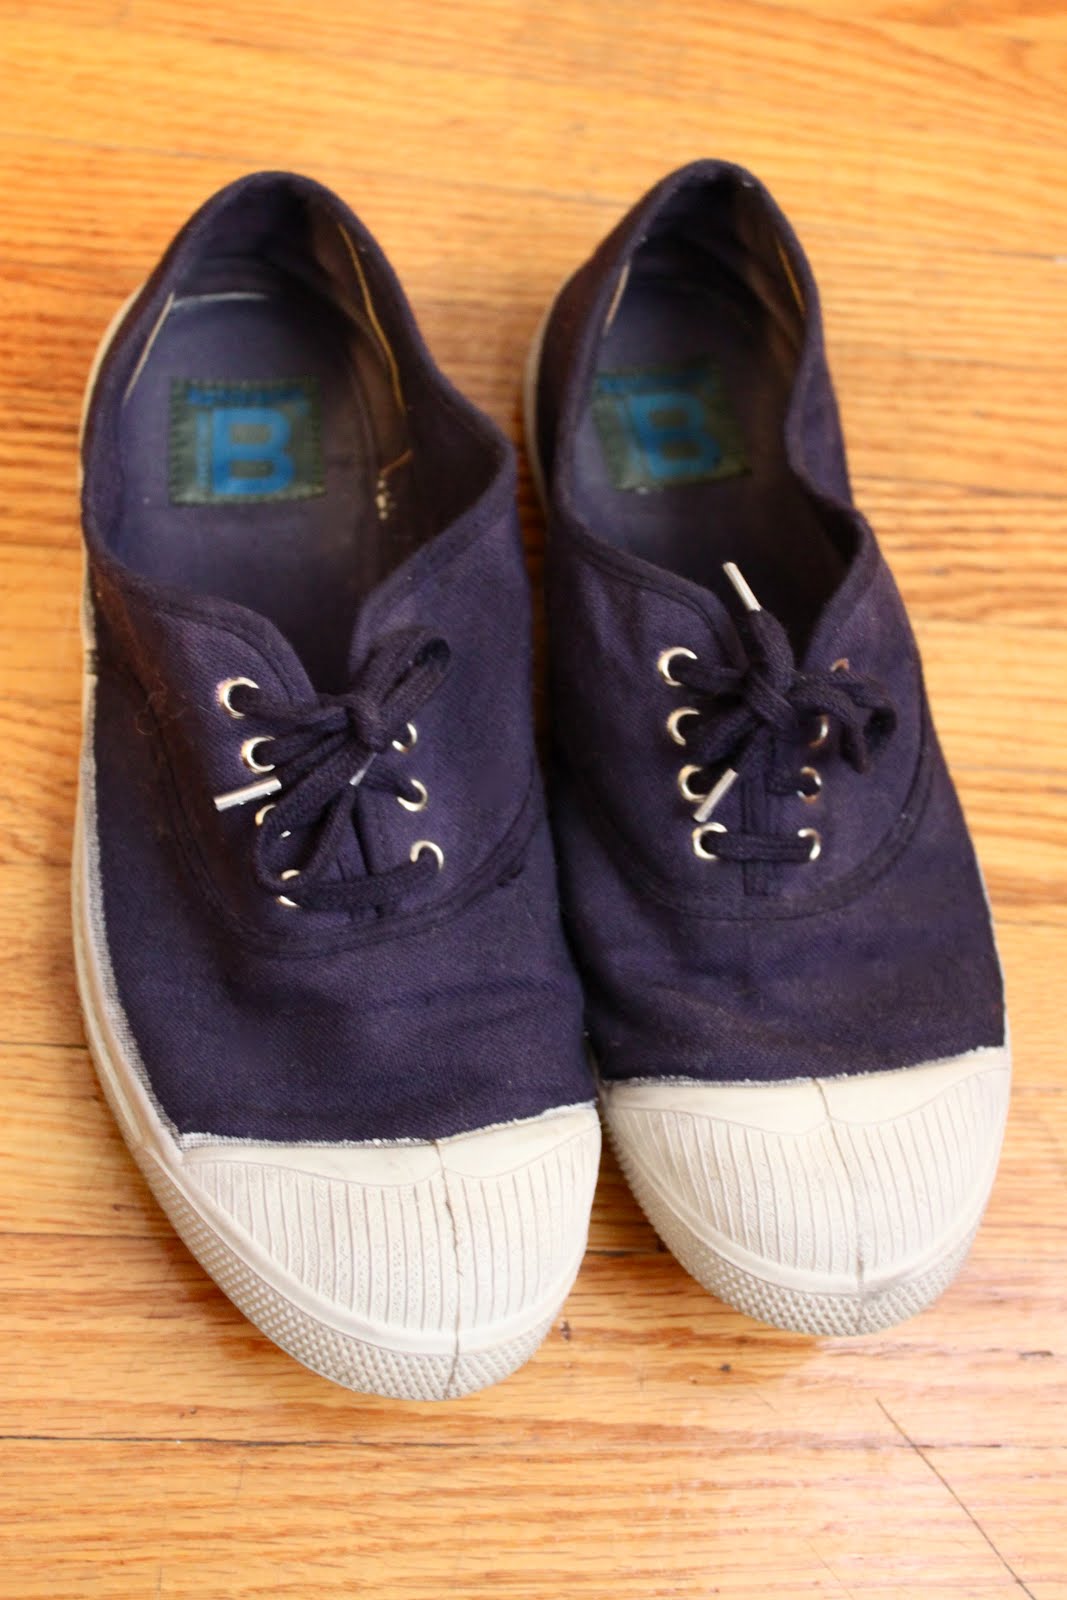 laws of general economy: Navy Bensimon sneakers size 39